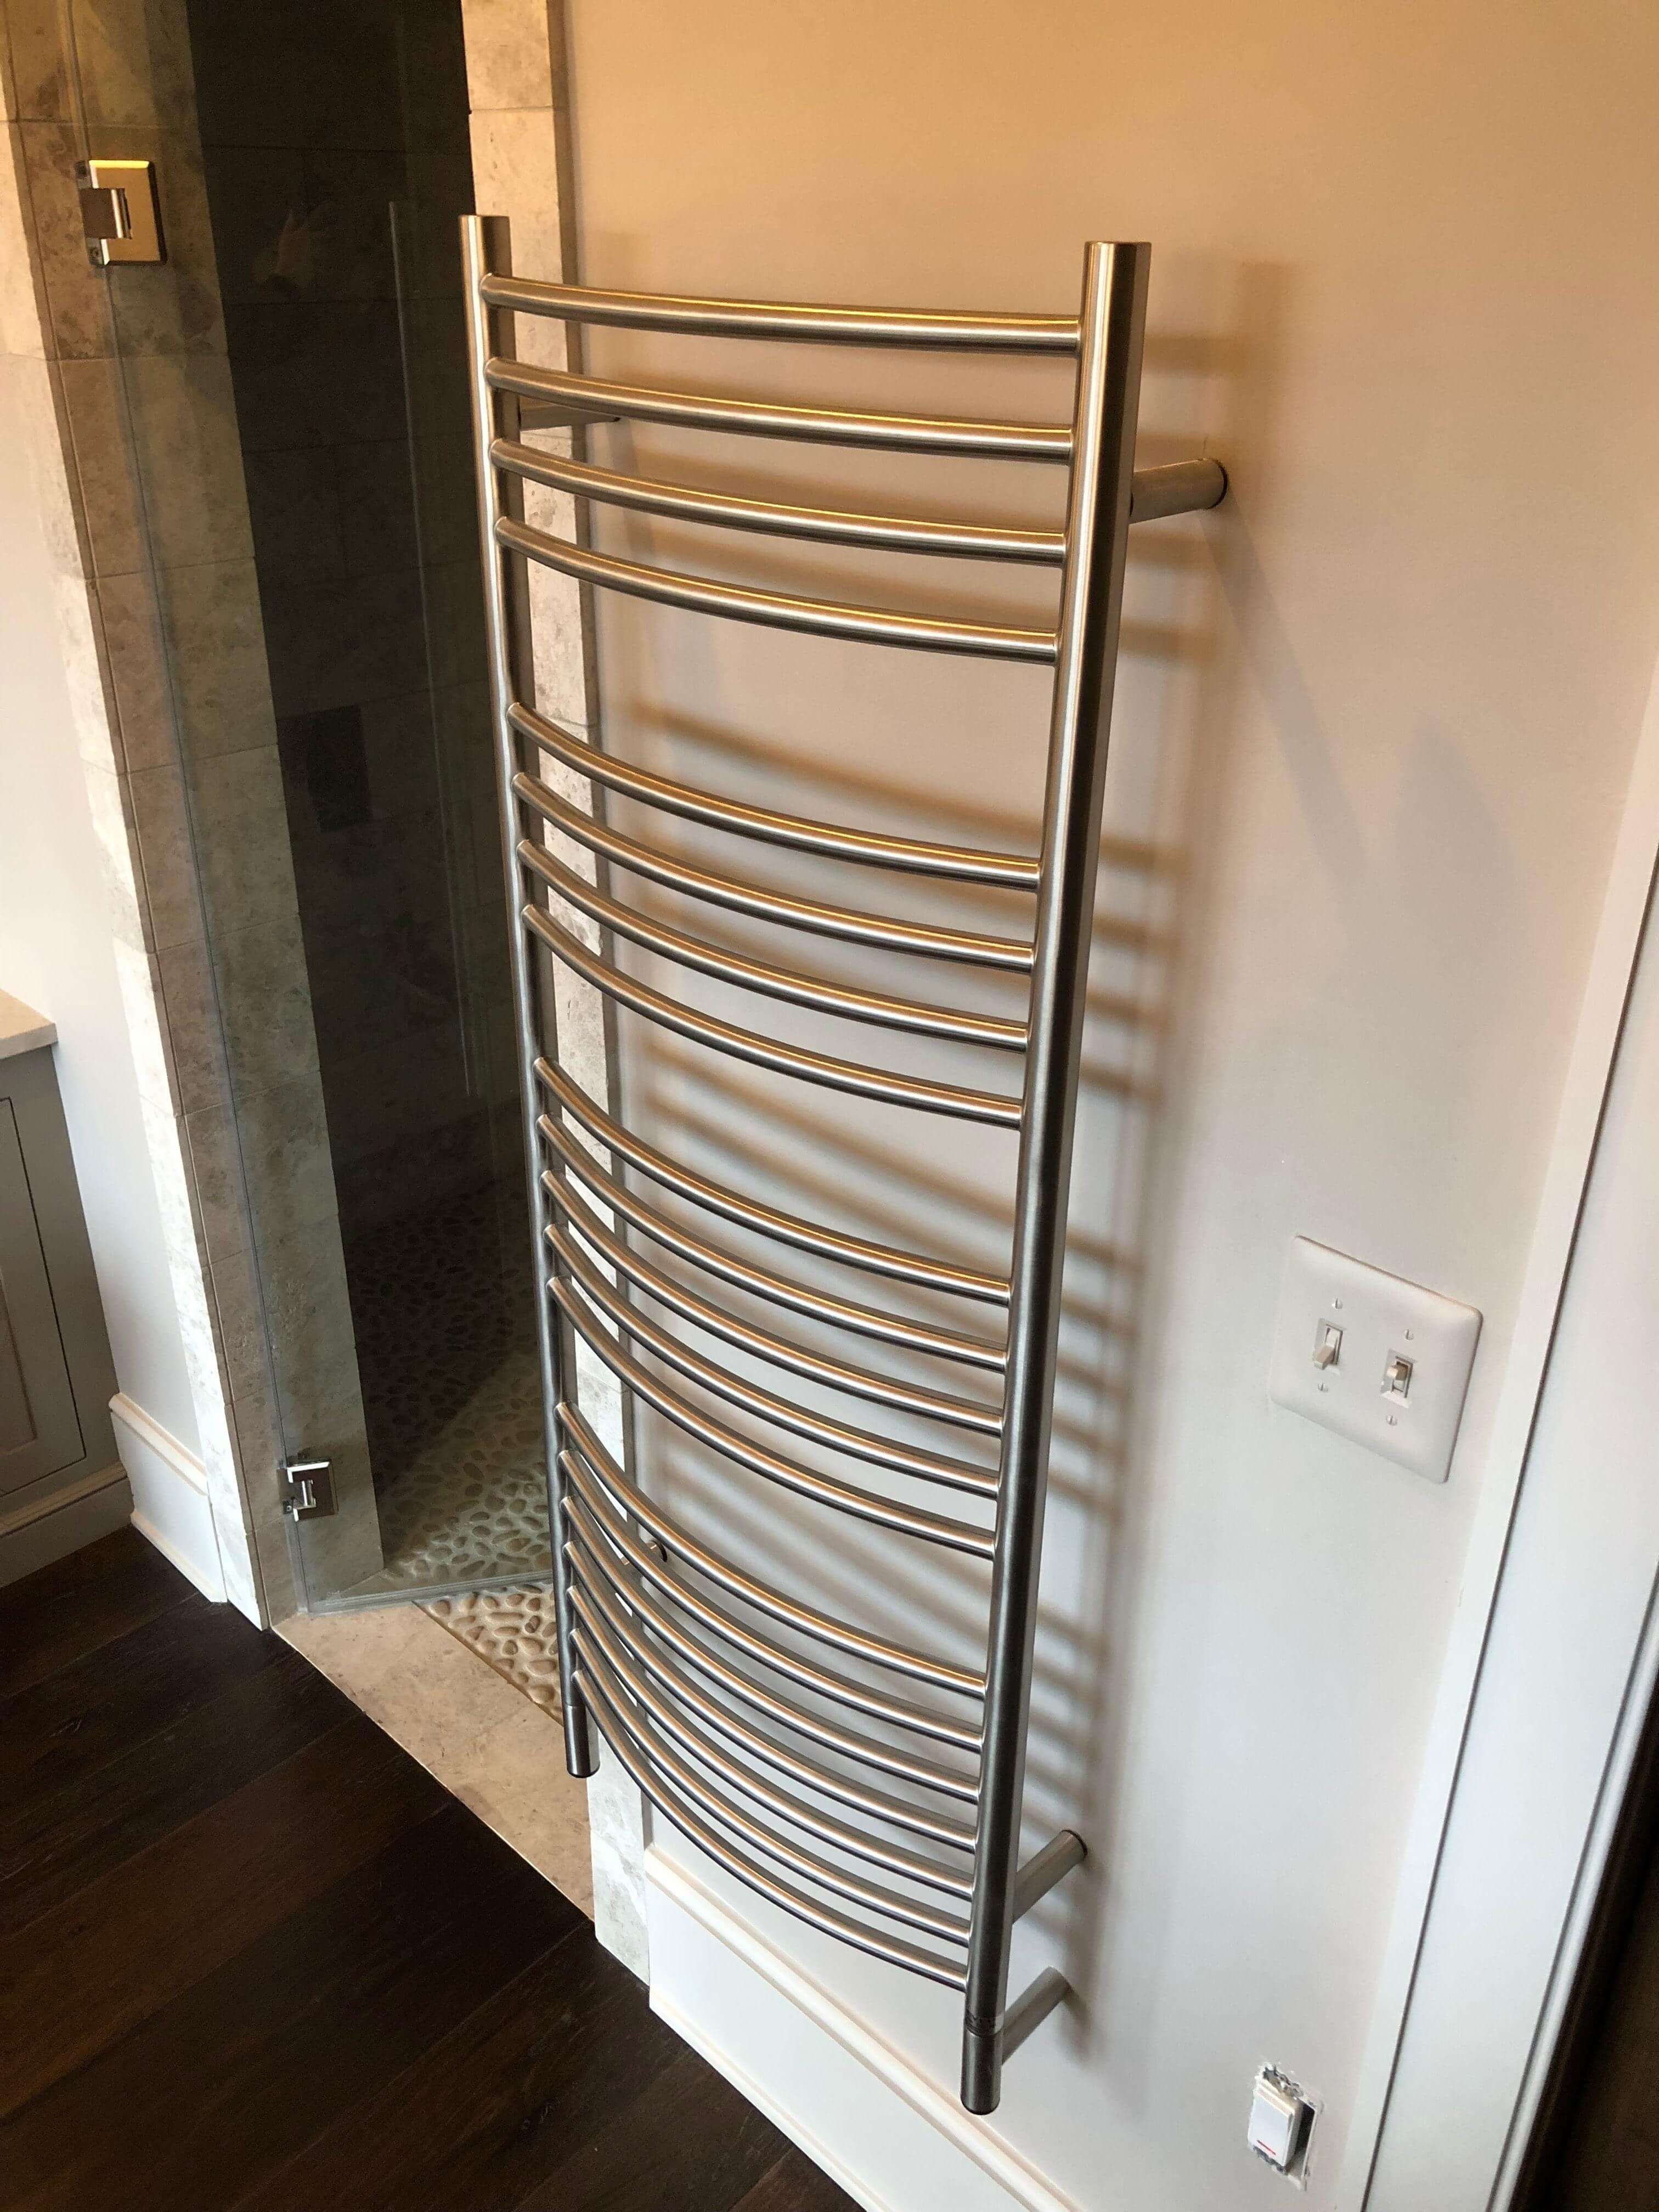 Amba Jeeves D Curved Hardwired Towel Warmer  - 20.5"w x 53"h - towelwarmers